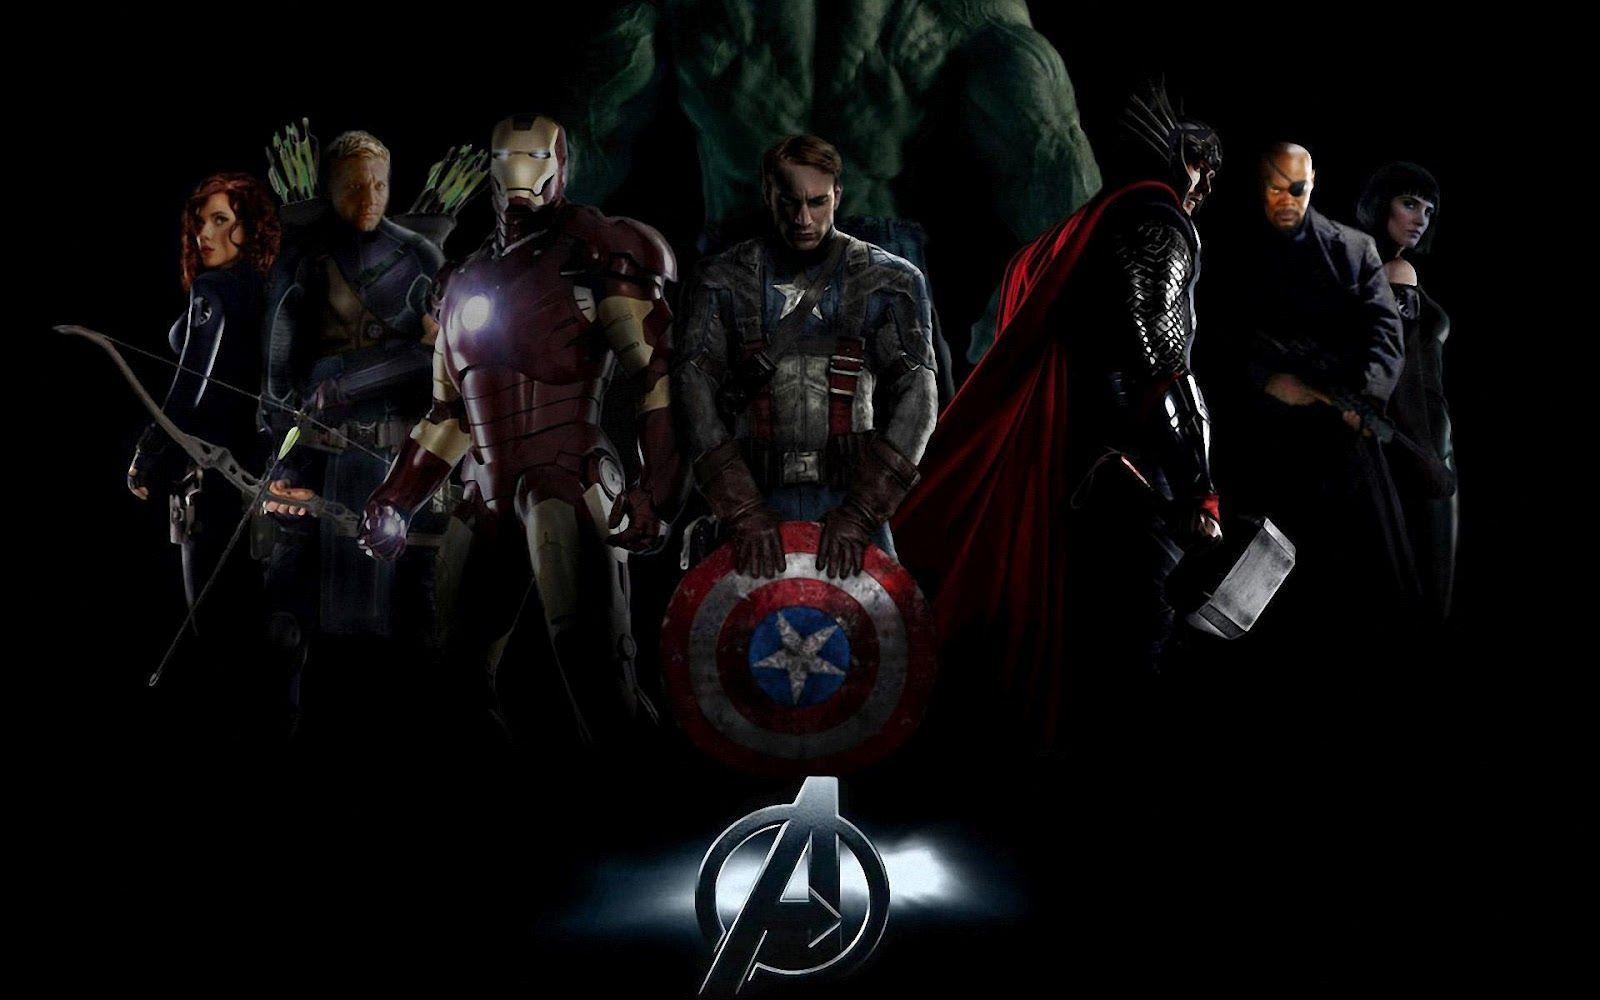 image For > The Avengers Movie Wallpaper HD